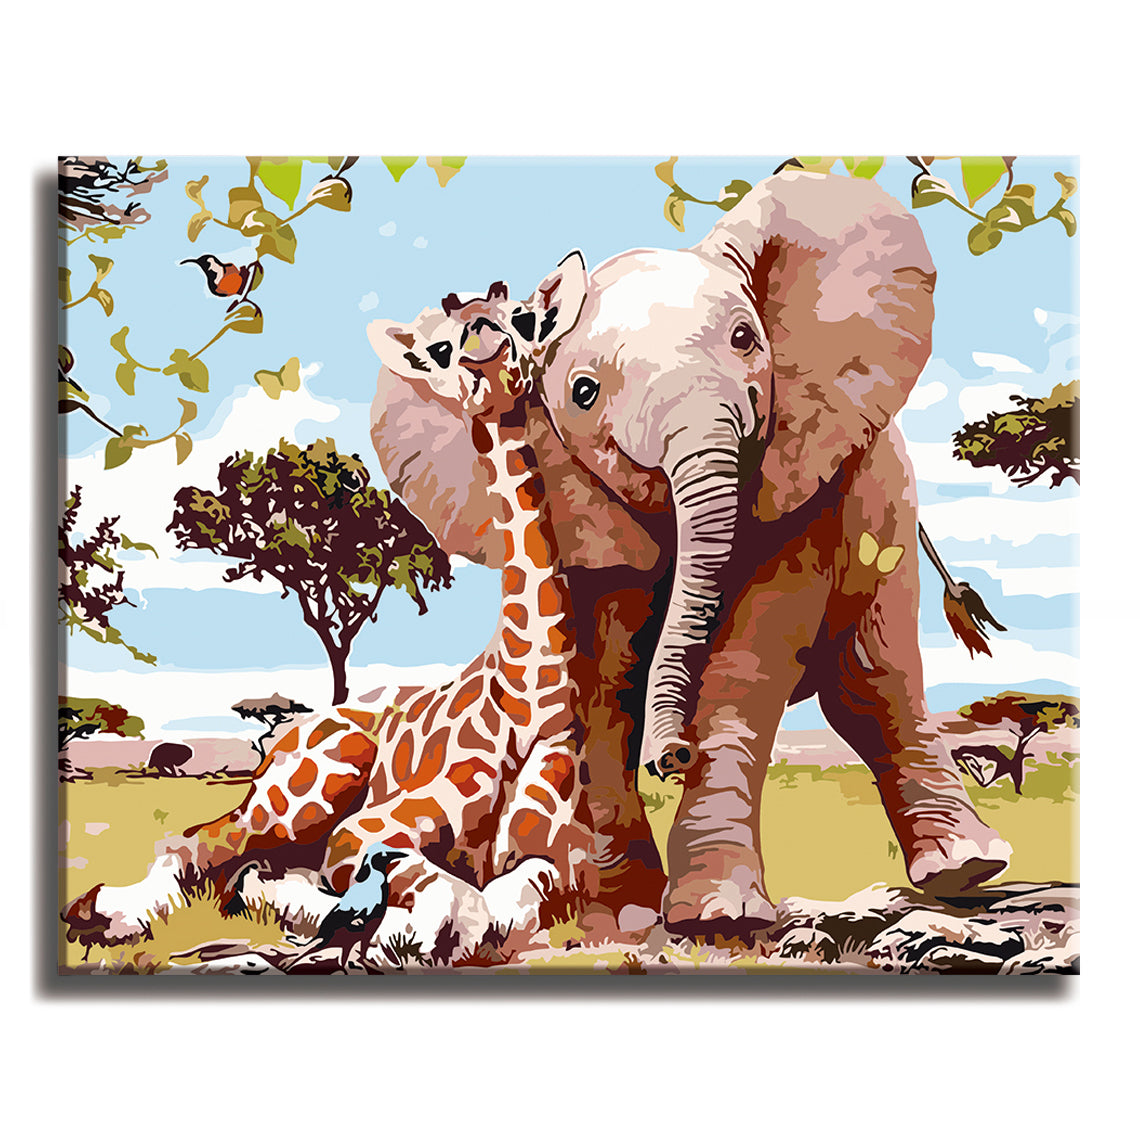 Cornovou 4 Pack Paint by Number for Adults Canvas Framed, 10x10 inch Animals Paint by Number Kits for Kids Beginner, DIY Elephant Giraffe Acrylic